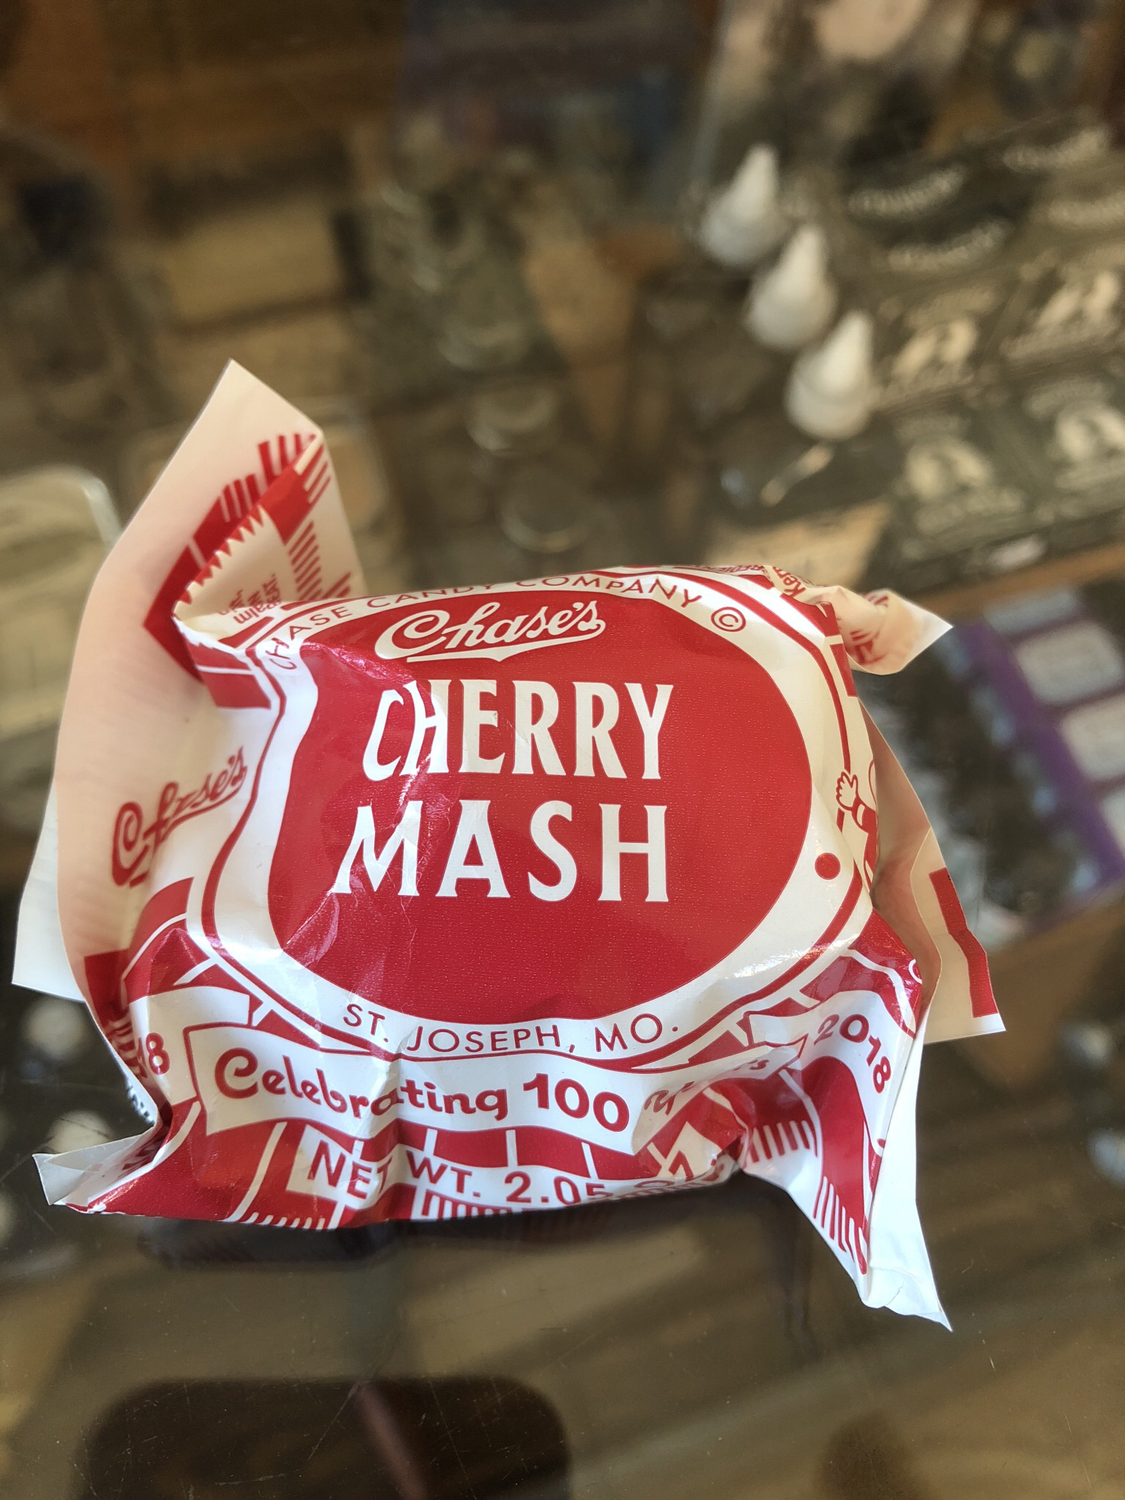 Chases old fashioned cherry mash